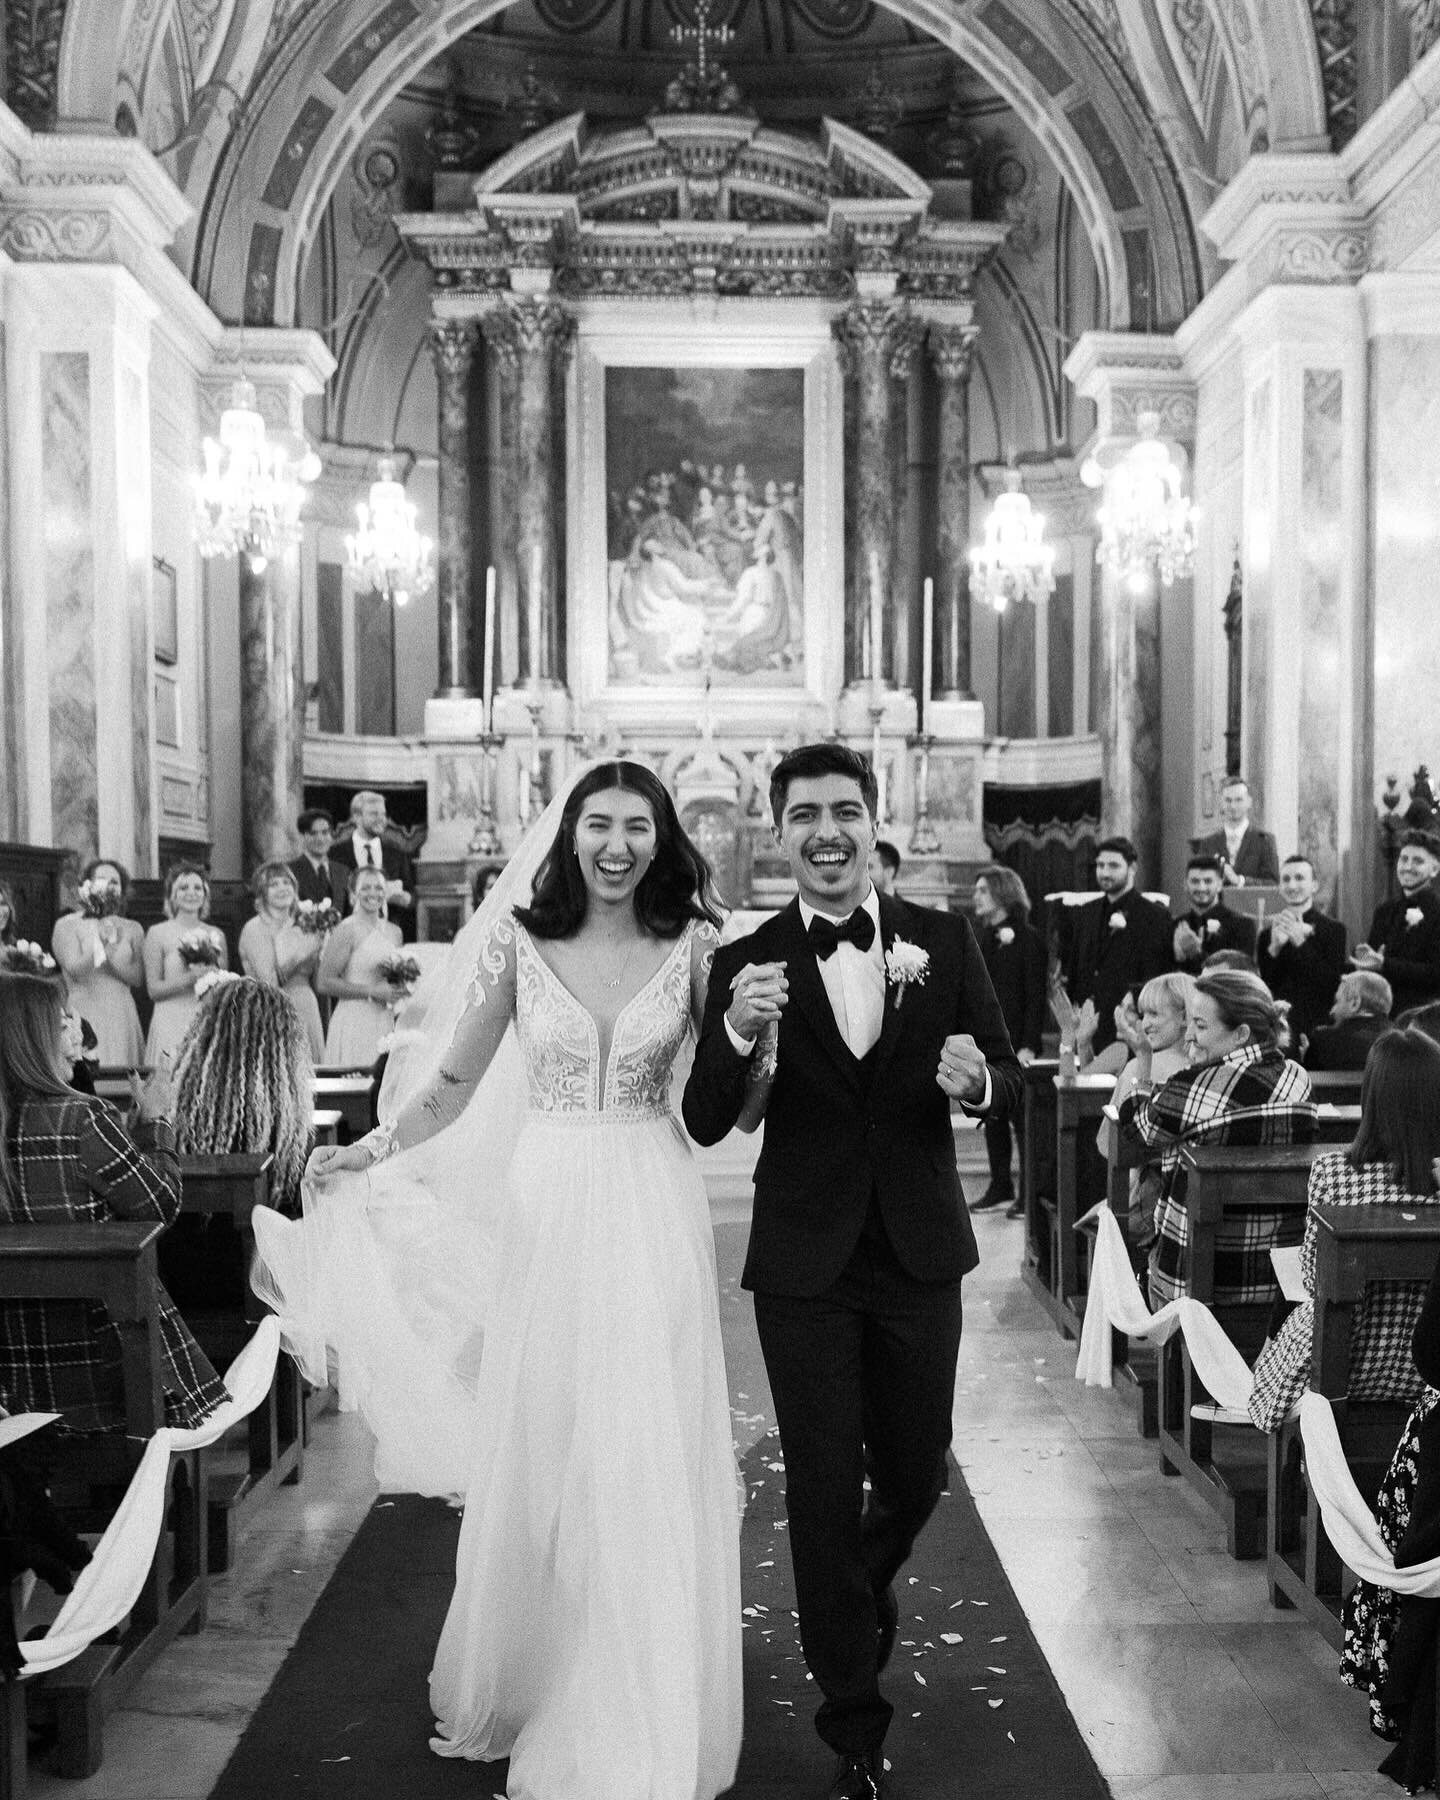 Can&rsquo;t believe it&rsquo;s been a whole year since we shot this beautiful church in the heart of Istanbul. Congrats Haley and Batu! Such a special memory with you all.